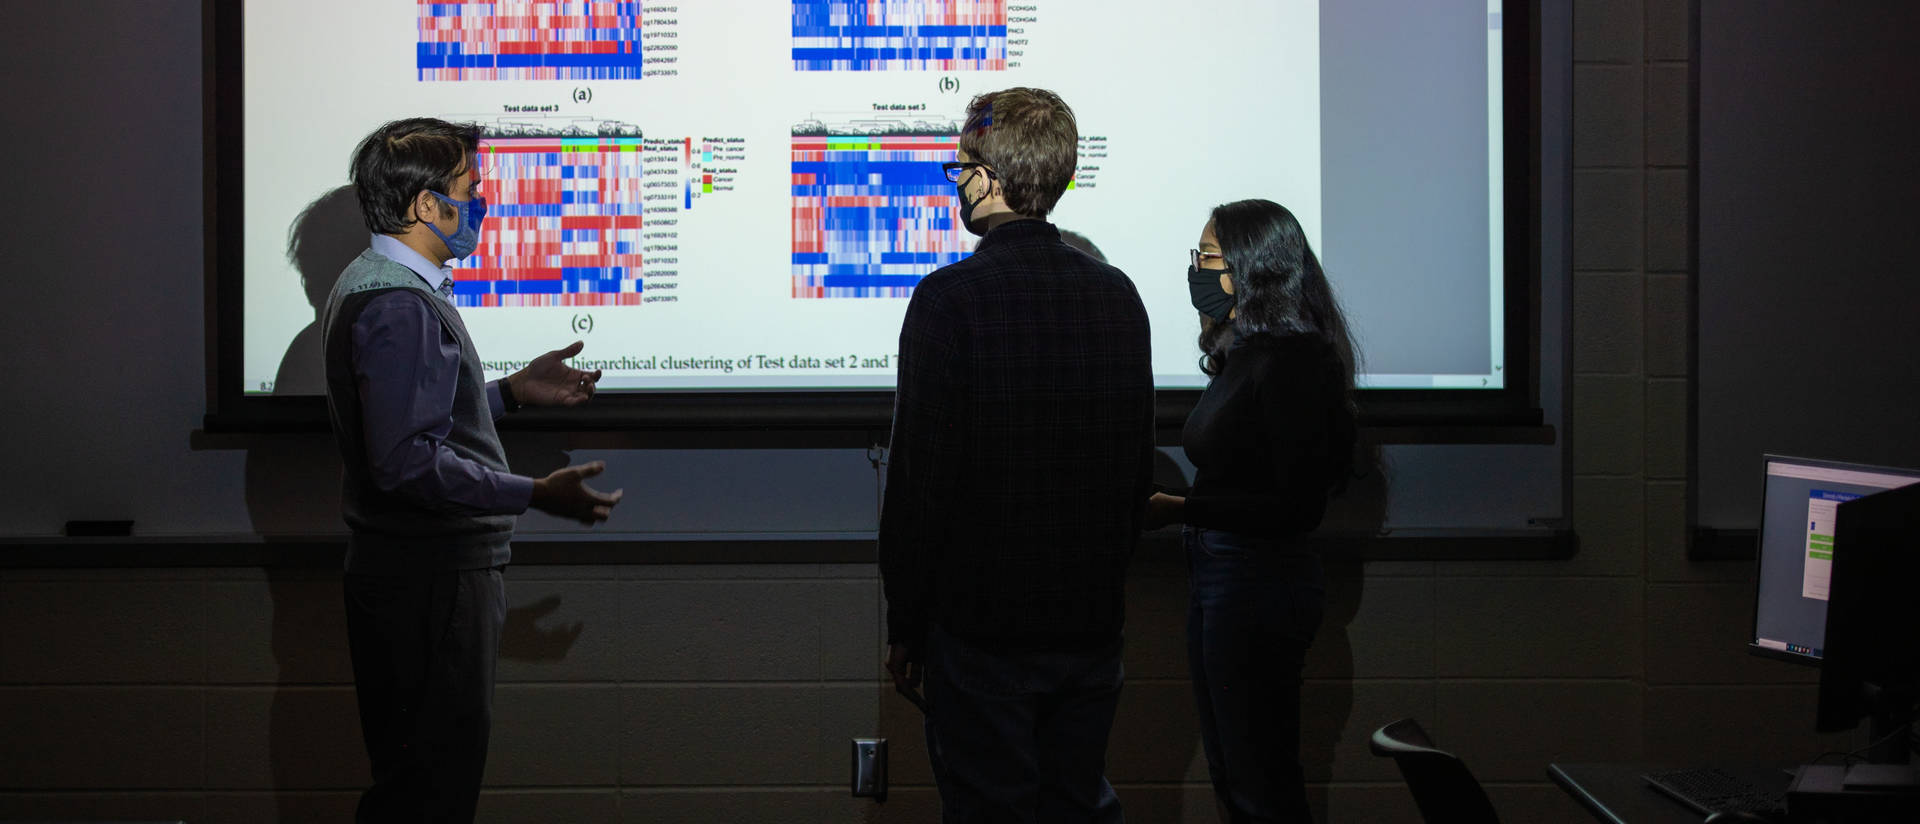 Computer science students standing in front of a projected image discussing